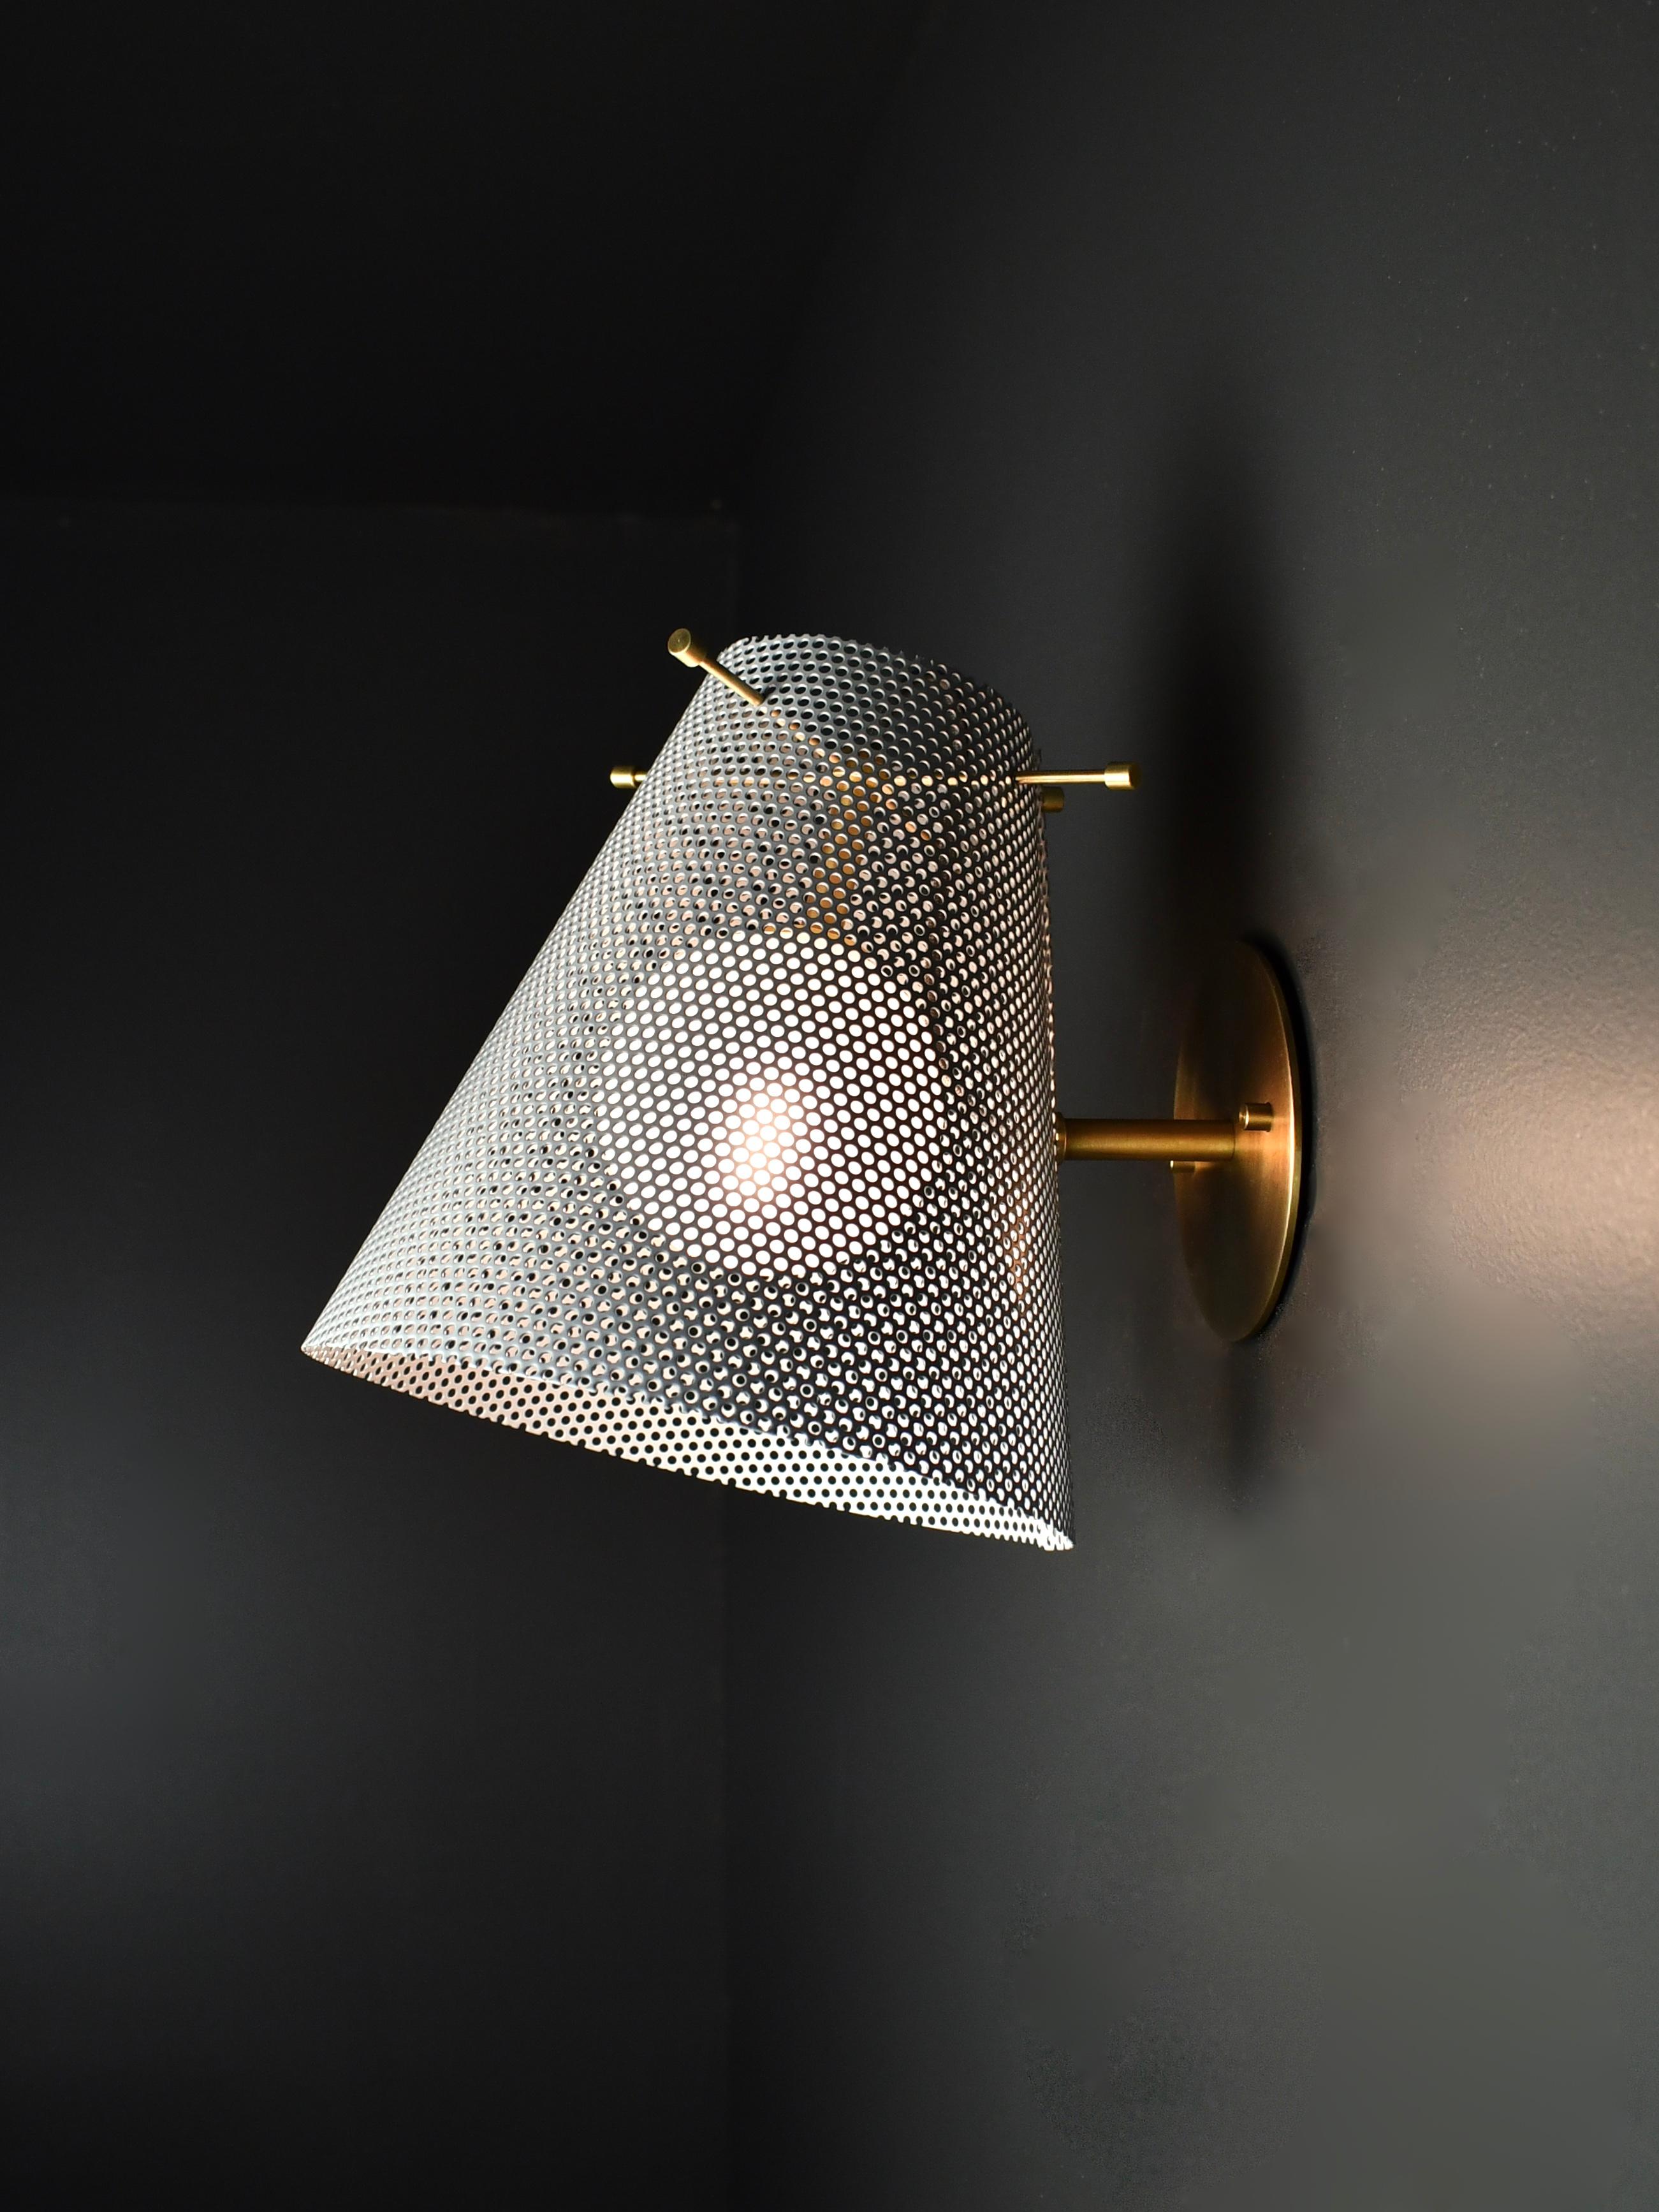 The Voile wall sconce is a handsome sculptural design that works well in both modern and transitional interiors. Shown here in our Dove (medium gray) enamel and Bronze hardware. Designed by Blueprint Lighting, 2020. This design is part of our Tulle